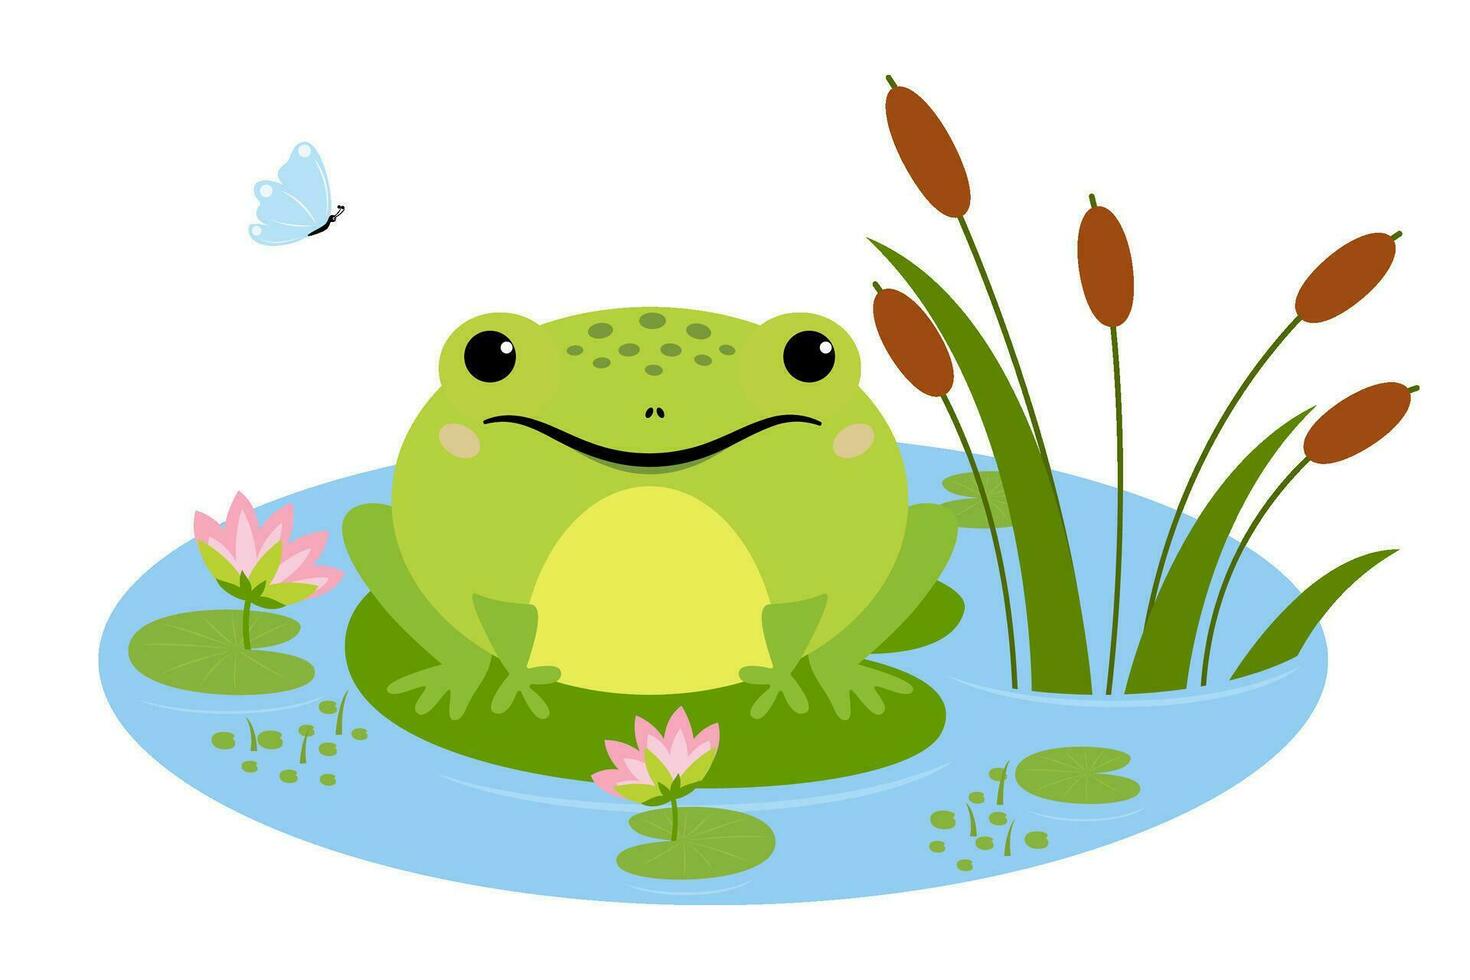 Cartoon frog sitting in pond, cute amphibia. Green toad in natural habitat, froggy water animal in pond with water lilies and butterfly vector